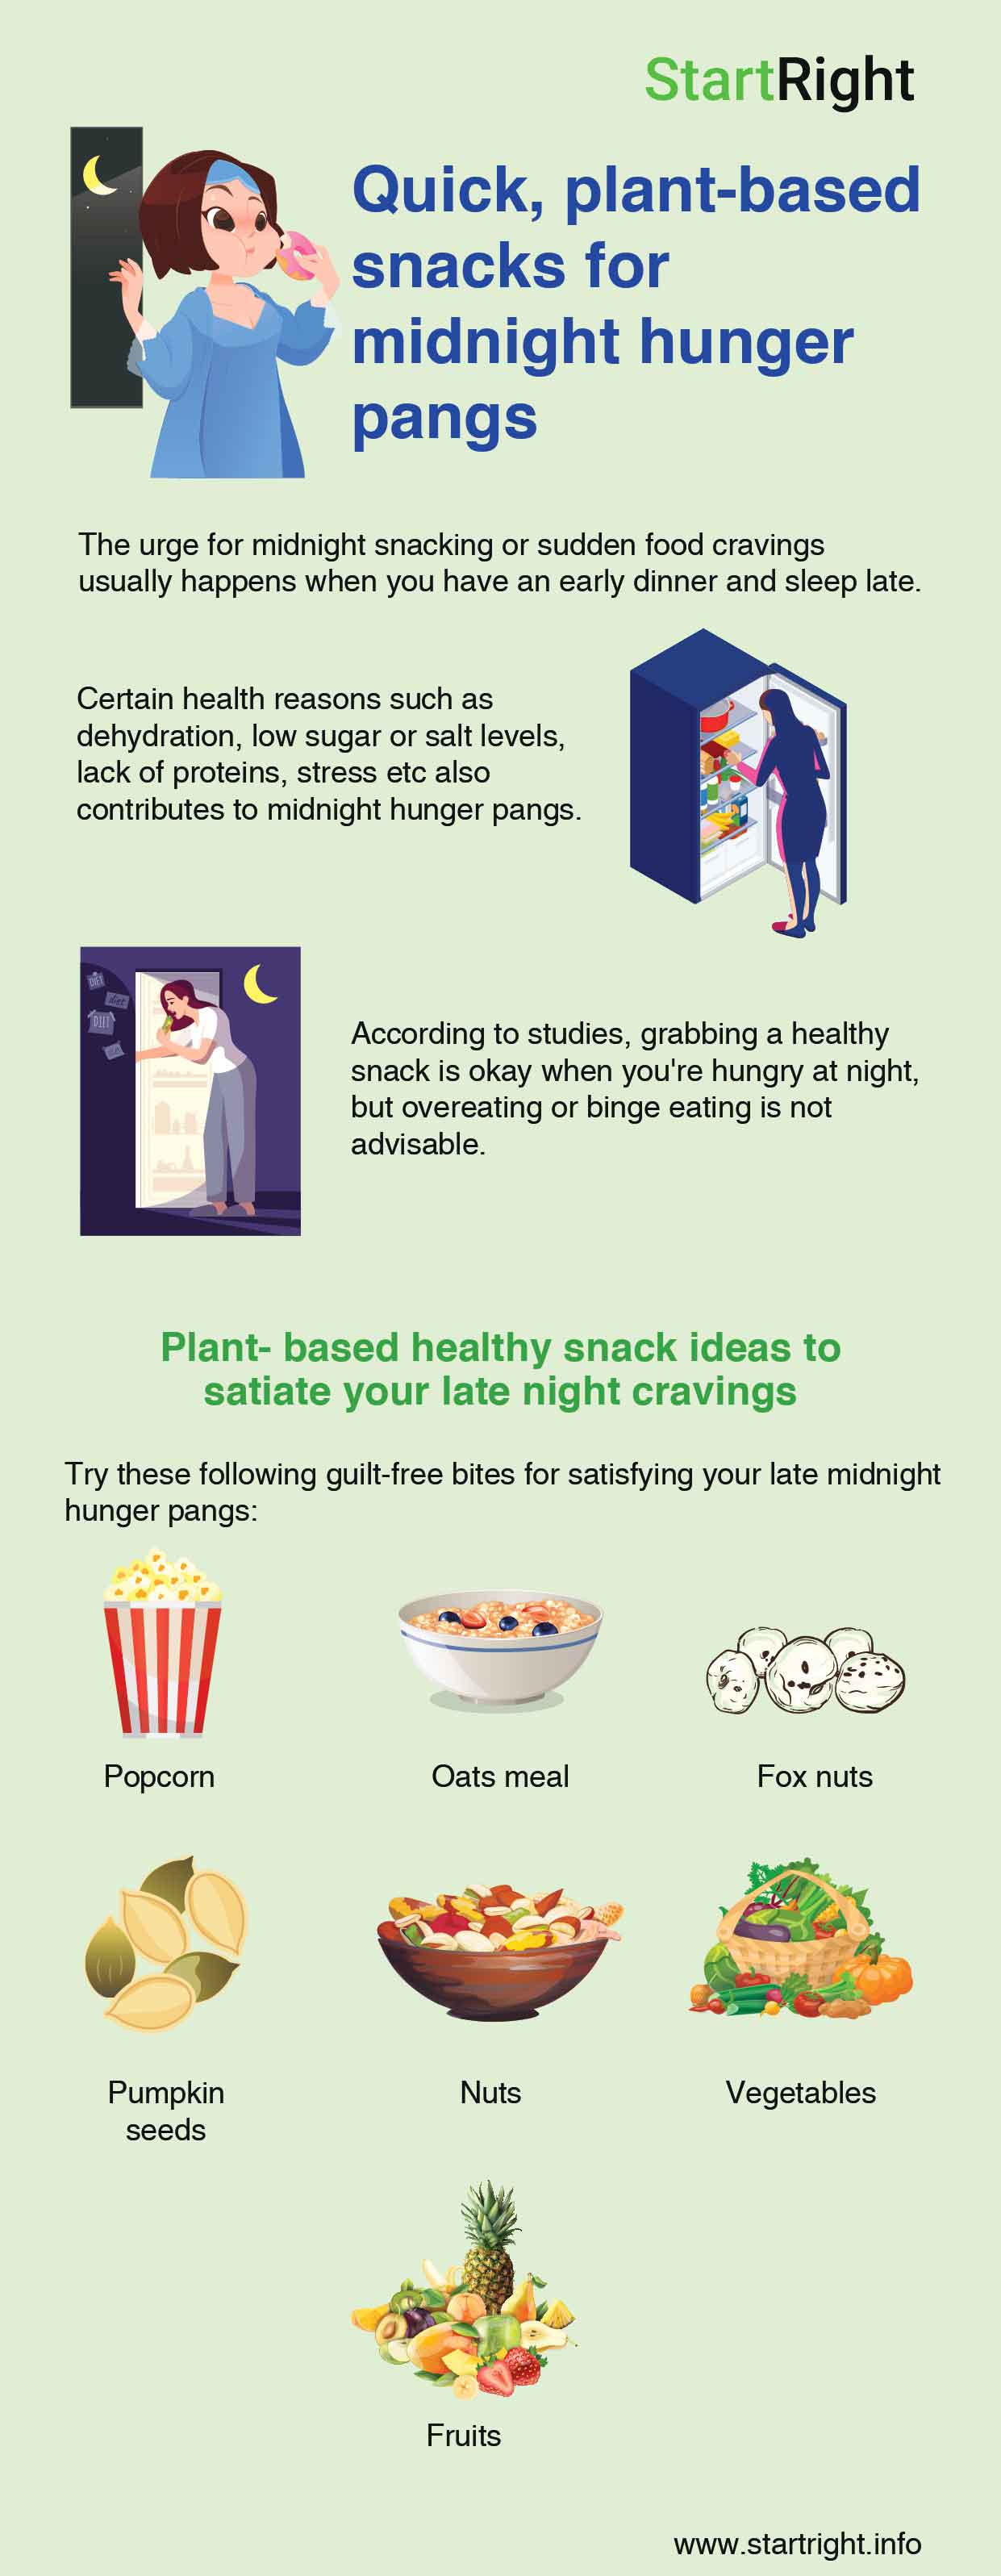 Late Night Cravings: How To Avoid Getting Hungry at Bedtime